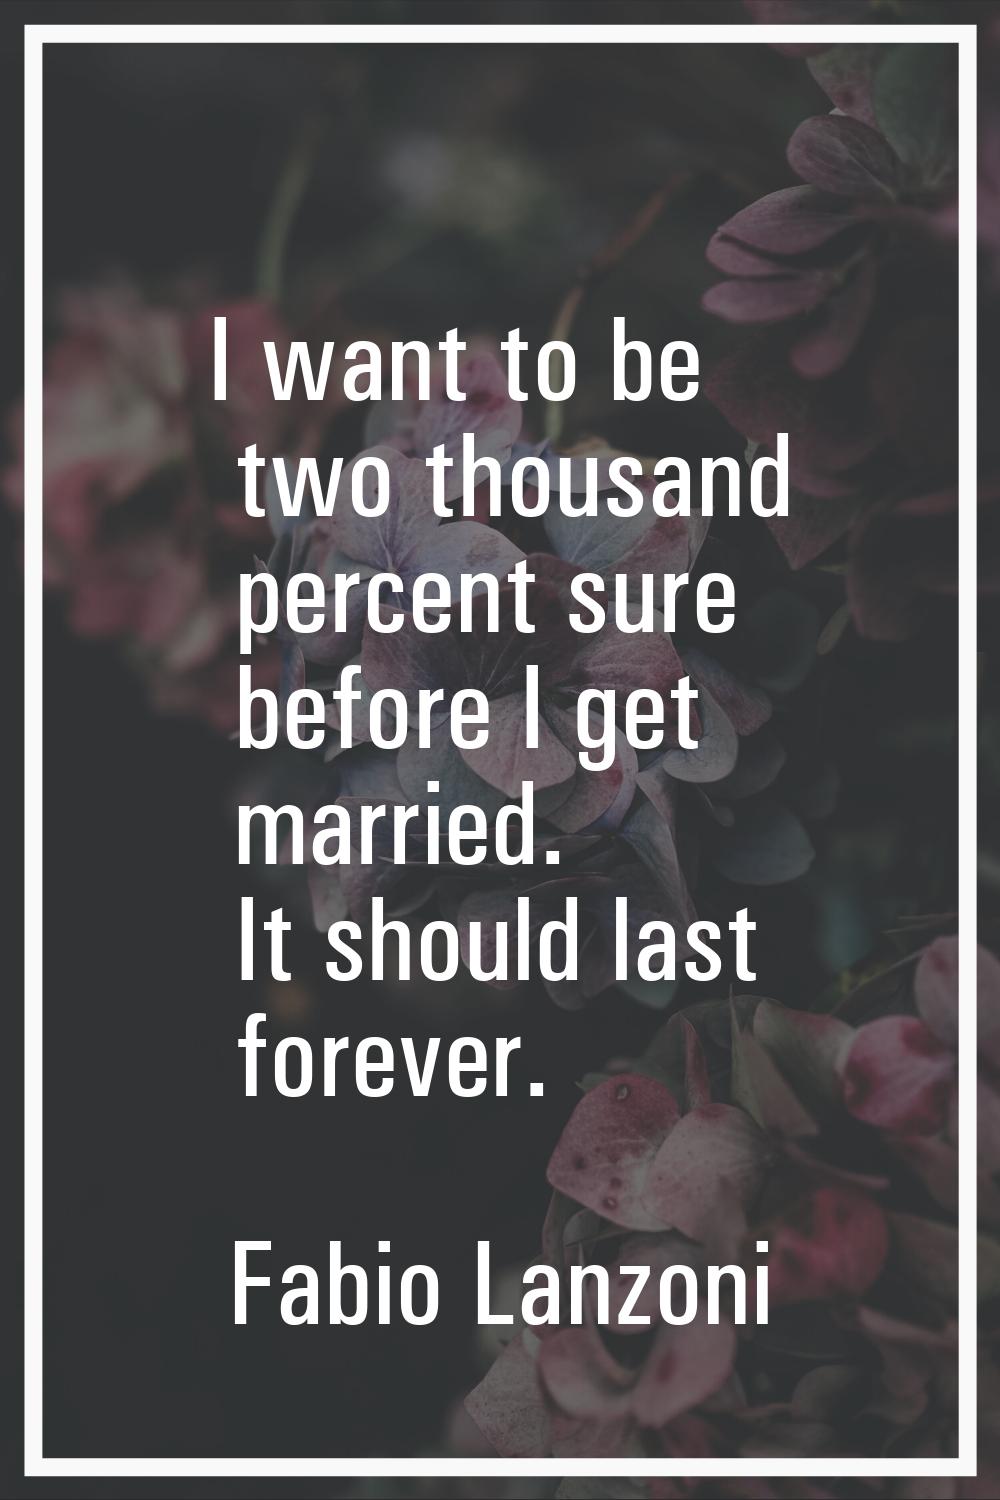 I want to be two thousand percent sure before I get married. It should last forever.